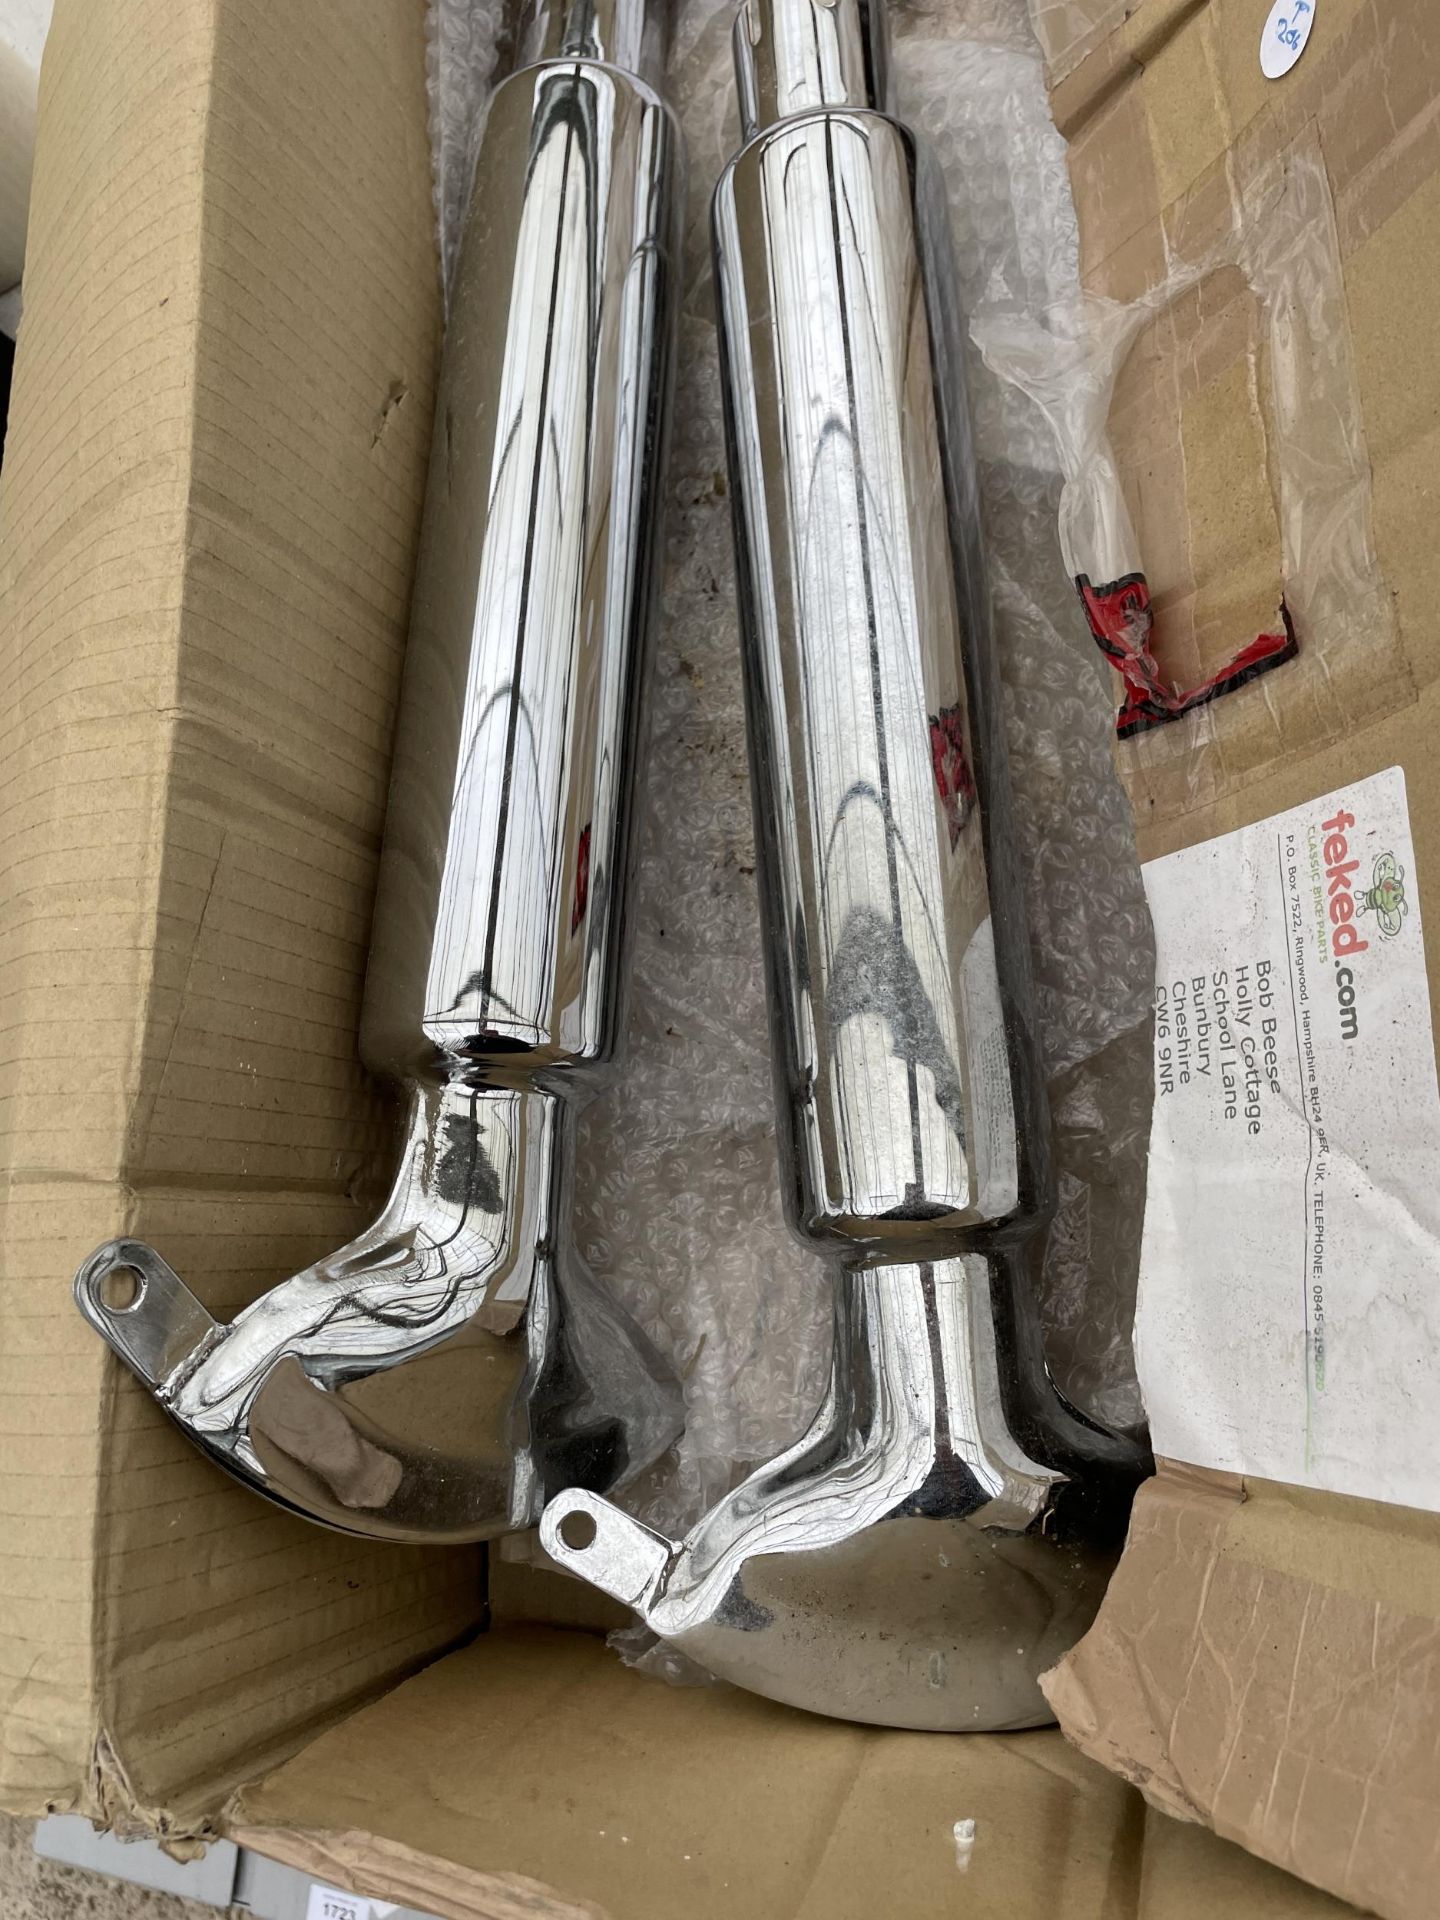 A SET OF MOTORBIKE EXHUAST SILENCERS BELIEVED TO BE FOR AN AJS - Image 2 of 3